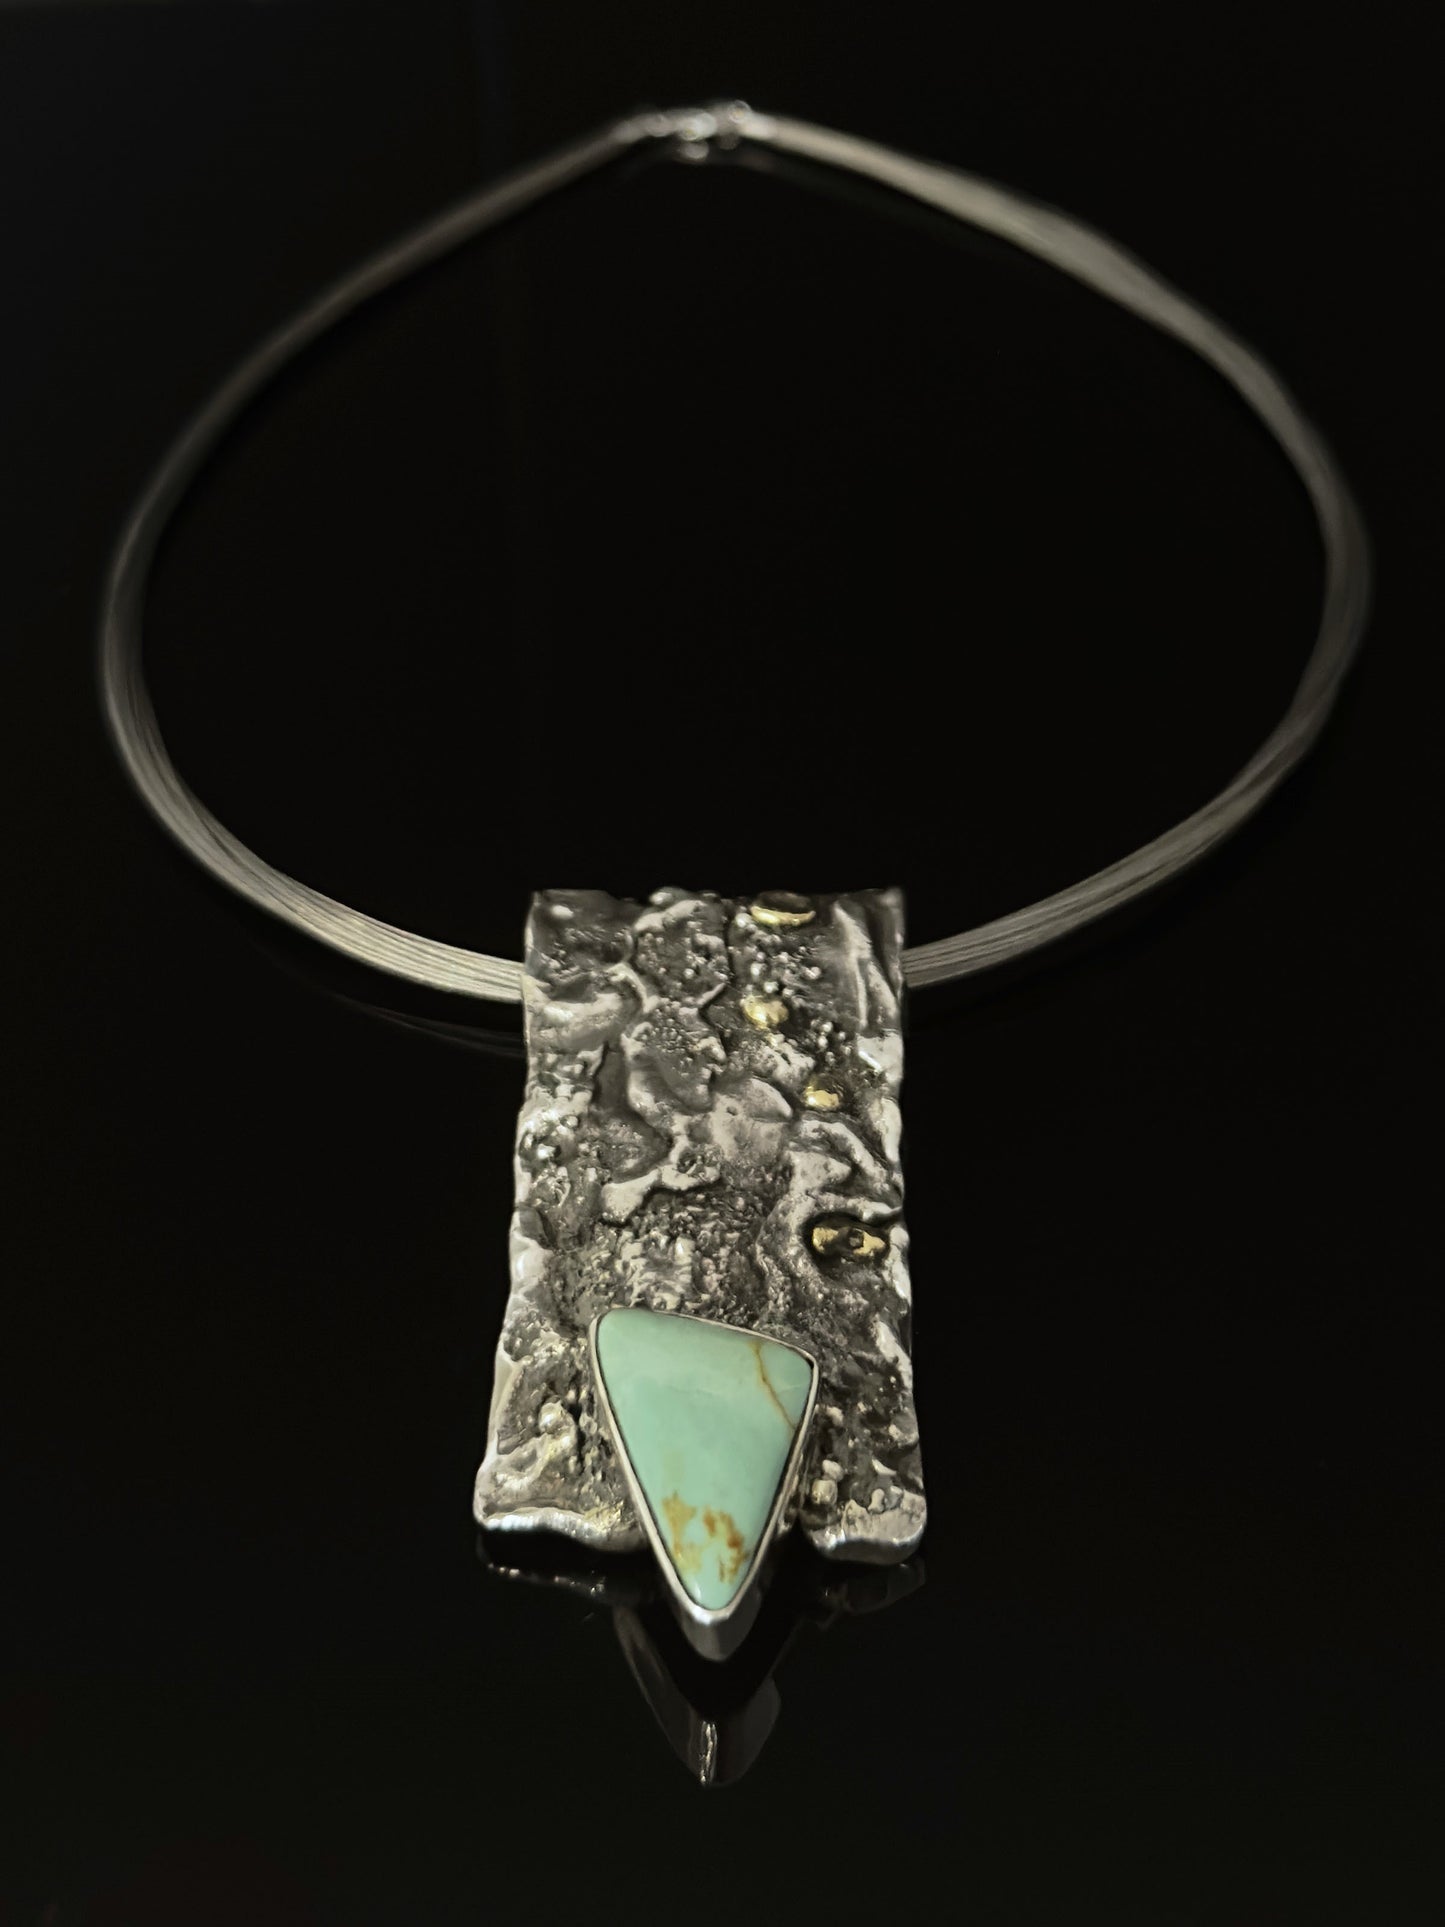 Tamara Kelly Designs - Reticulated pendant series with stone